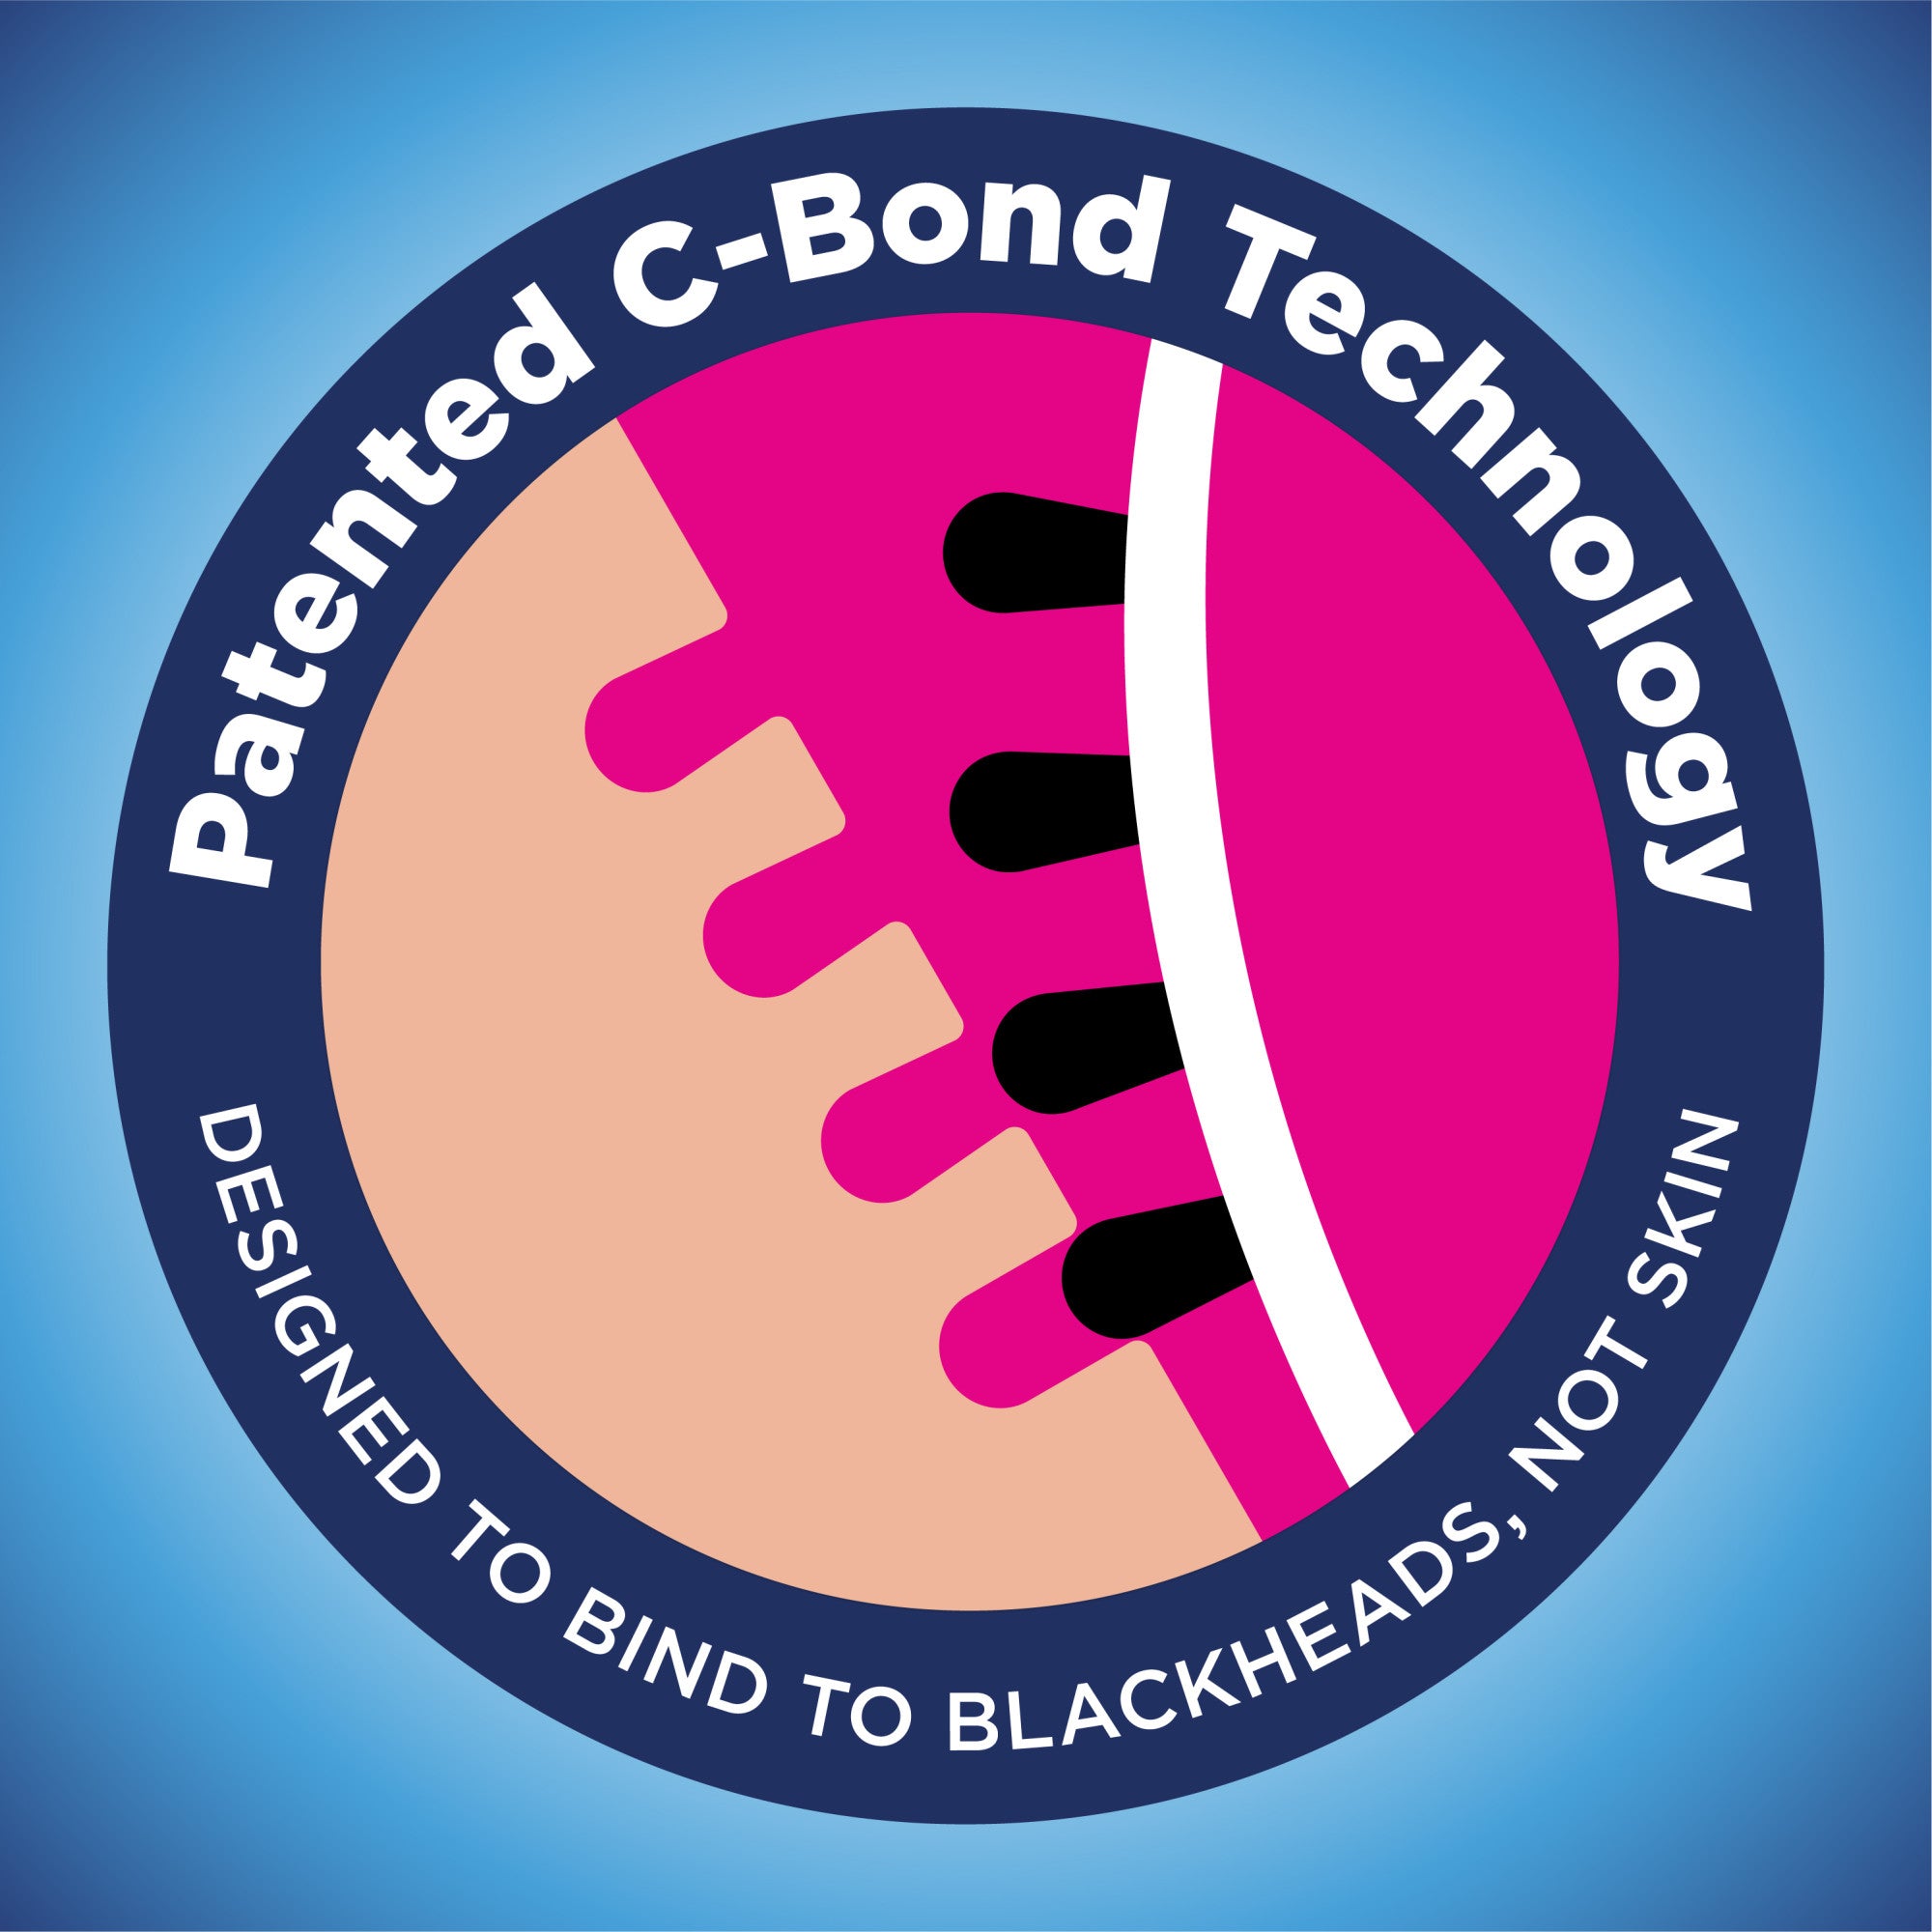 Patented C-Bond Technology. Designed to bind to blackheads not skin.